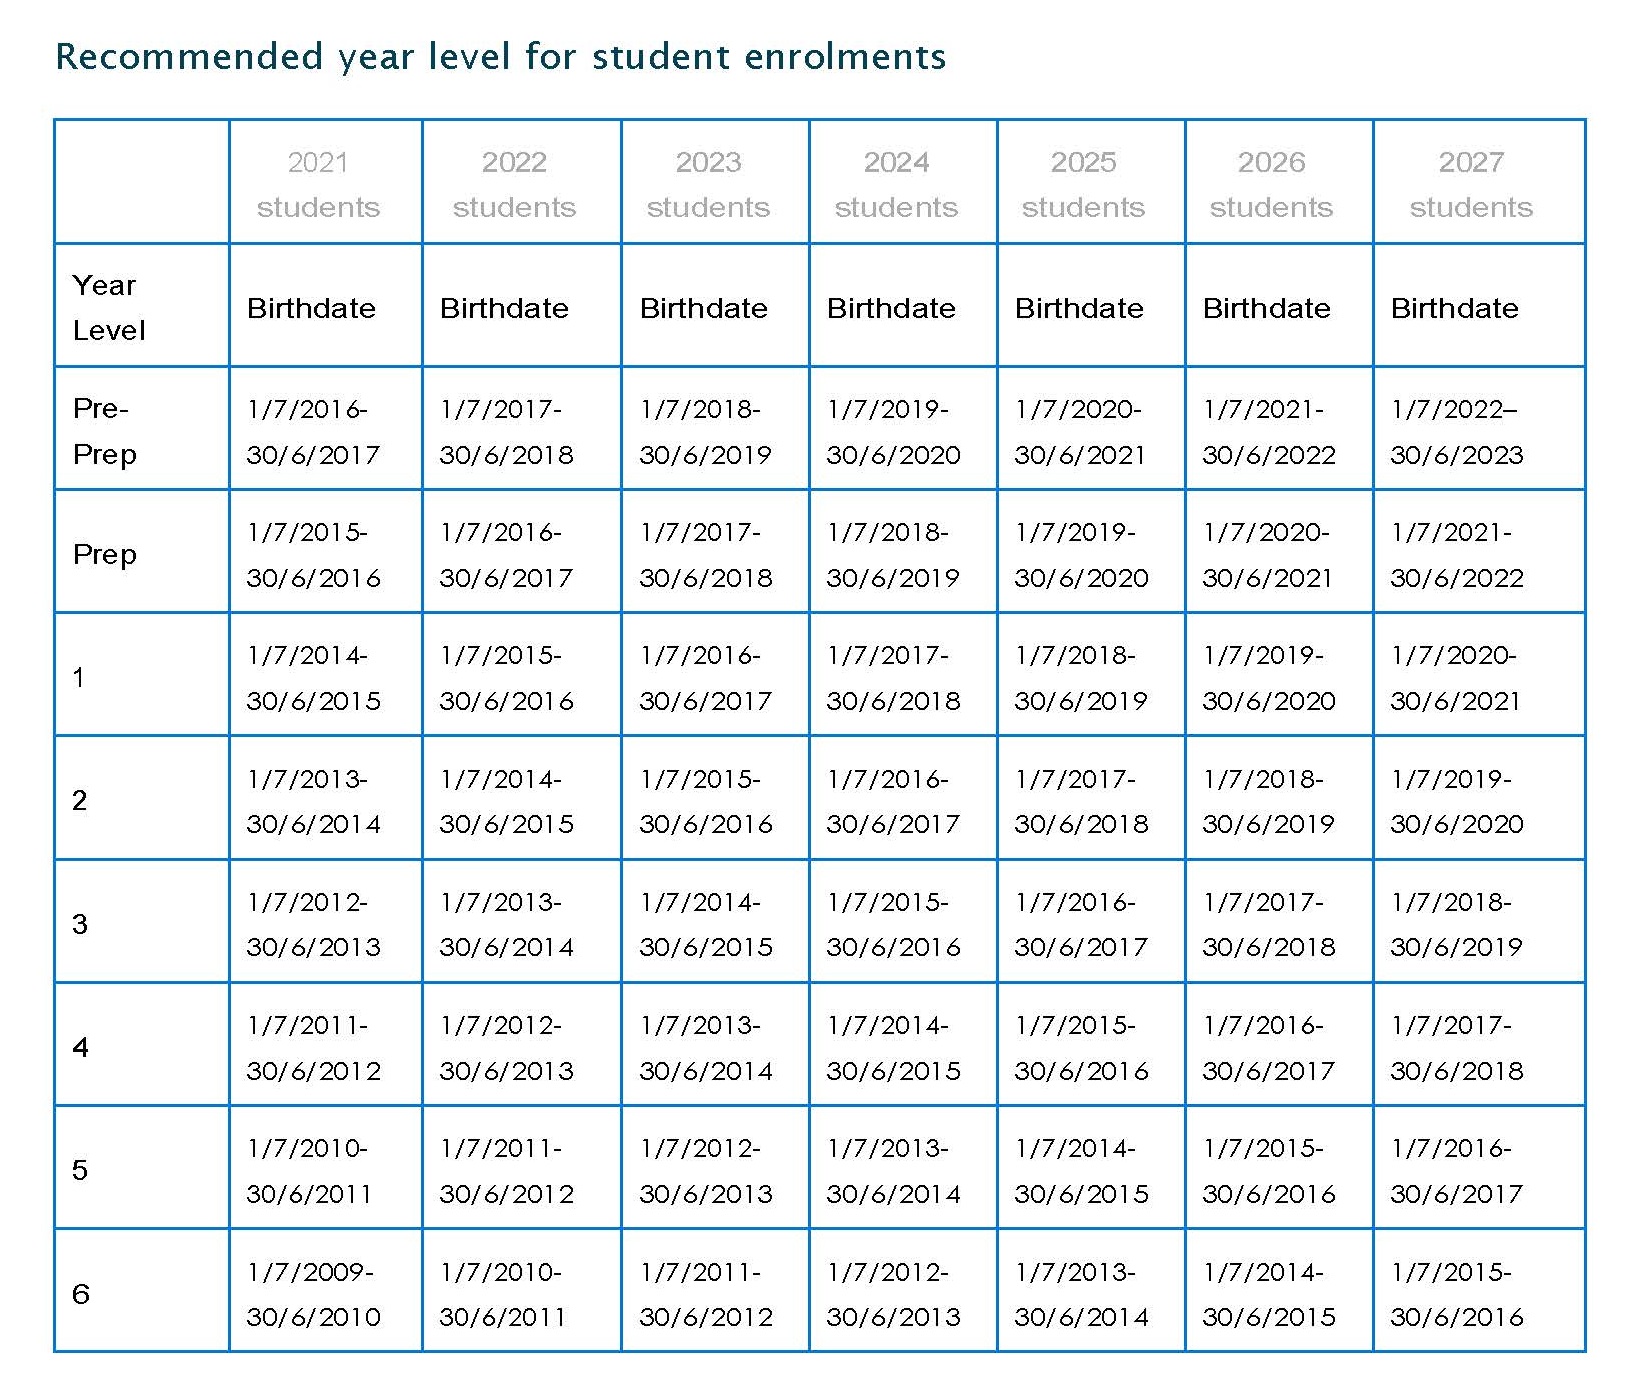 Recommended year level for student enrolments.jpg